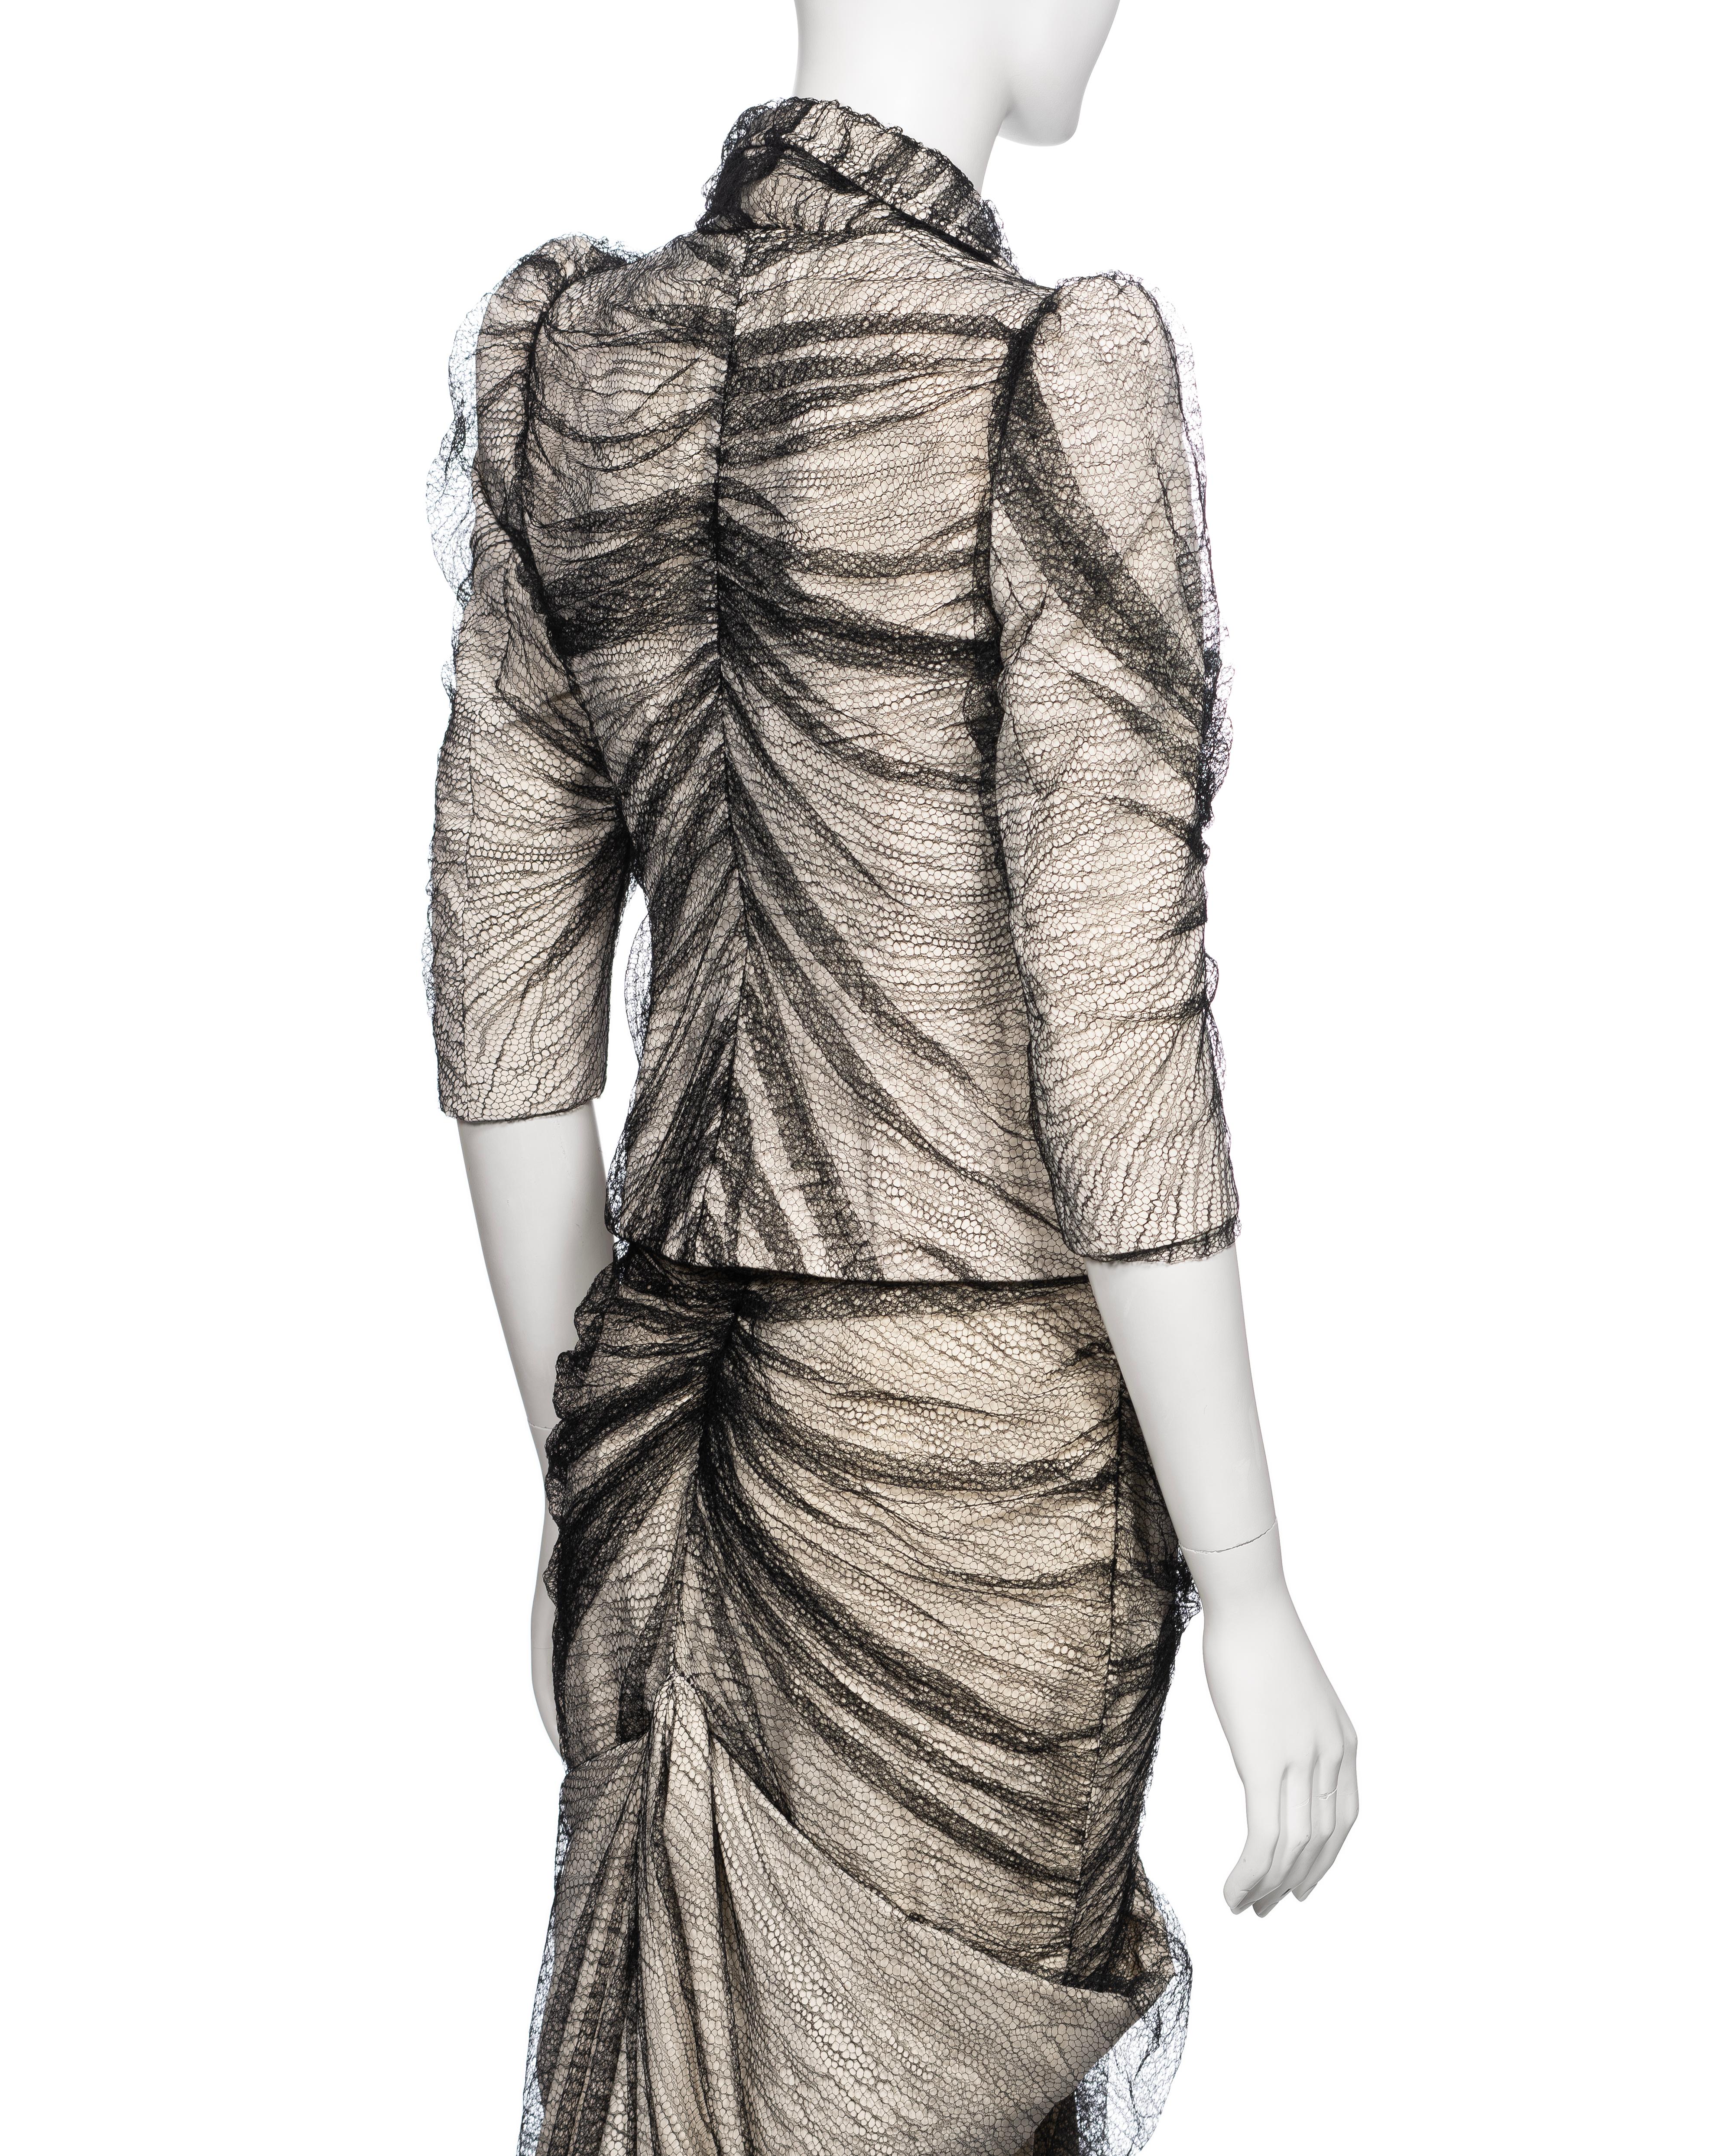 Alexander McQueen 'Sarabande' Ivory Skirt Suit with Black Lace Overlay, SS 2007 For Sale 6